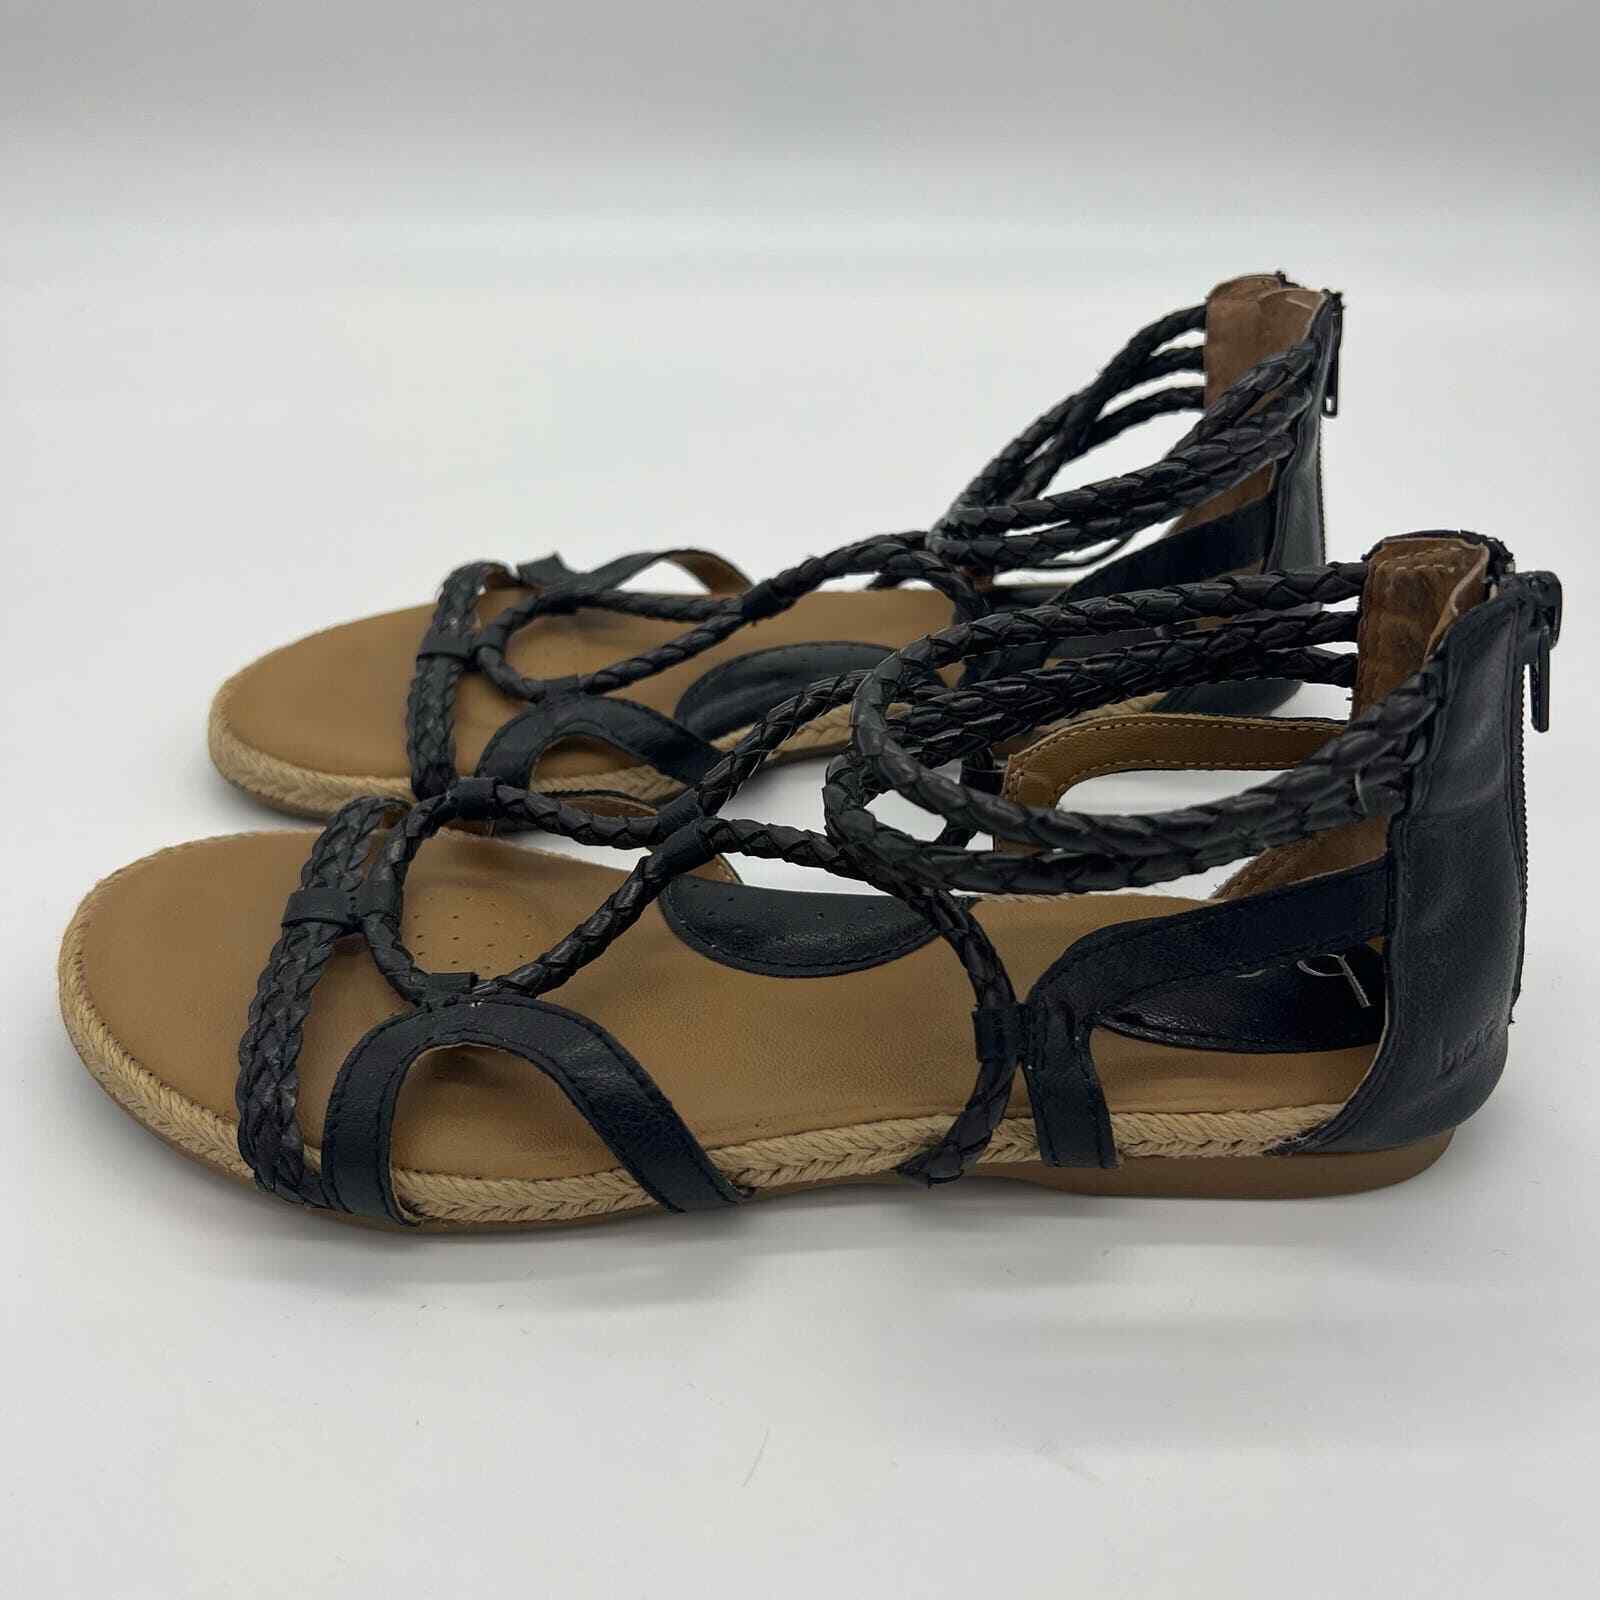 b.o.c Black Leather Gladiator Strappy Sandals Women’s Size 8 Braided Jute